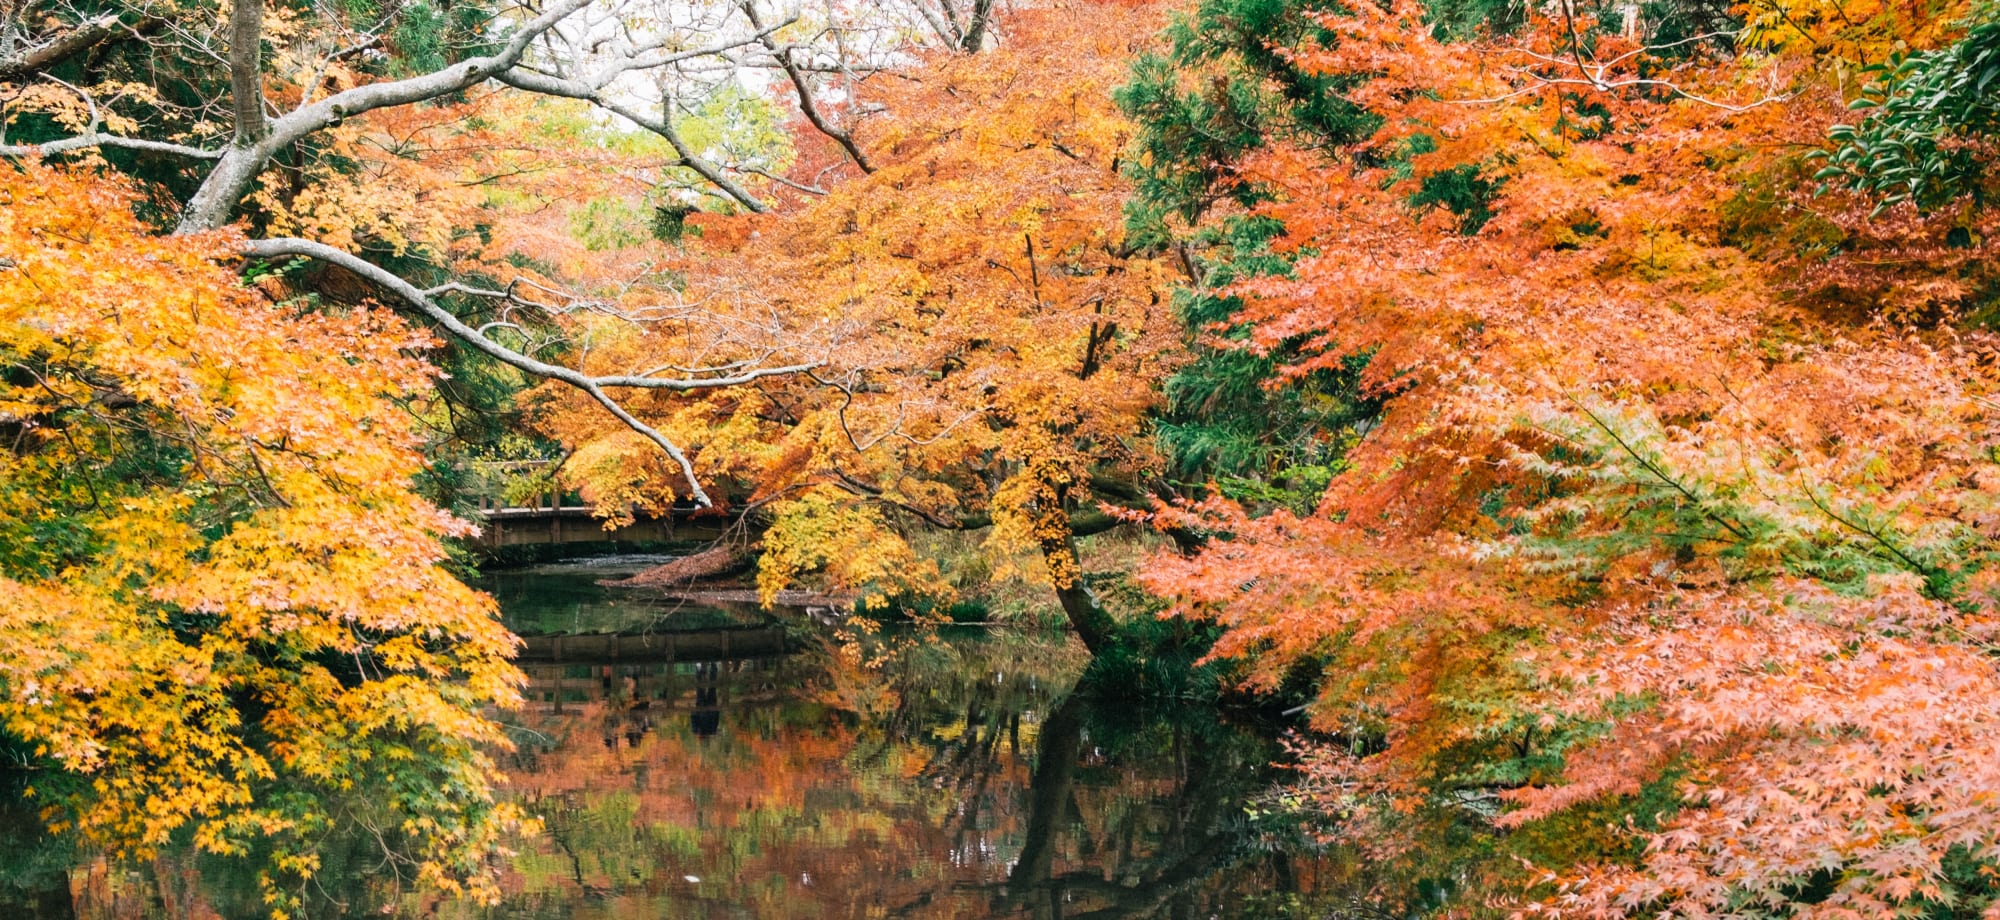 A river is surrounded by trees with leaves turning colours of orange, red and yellow.